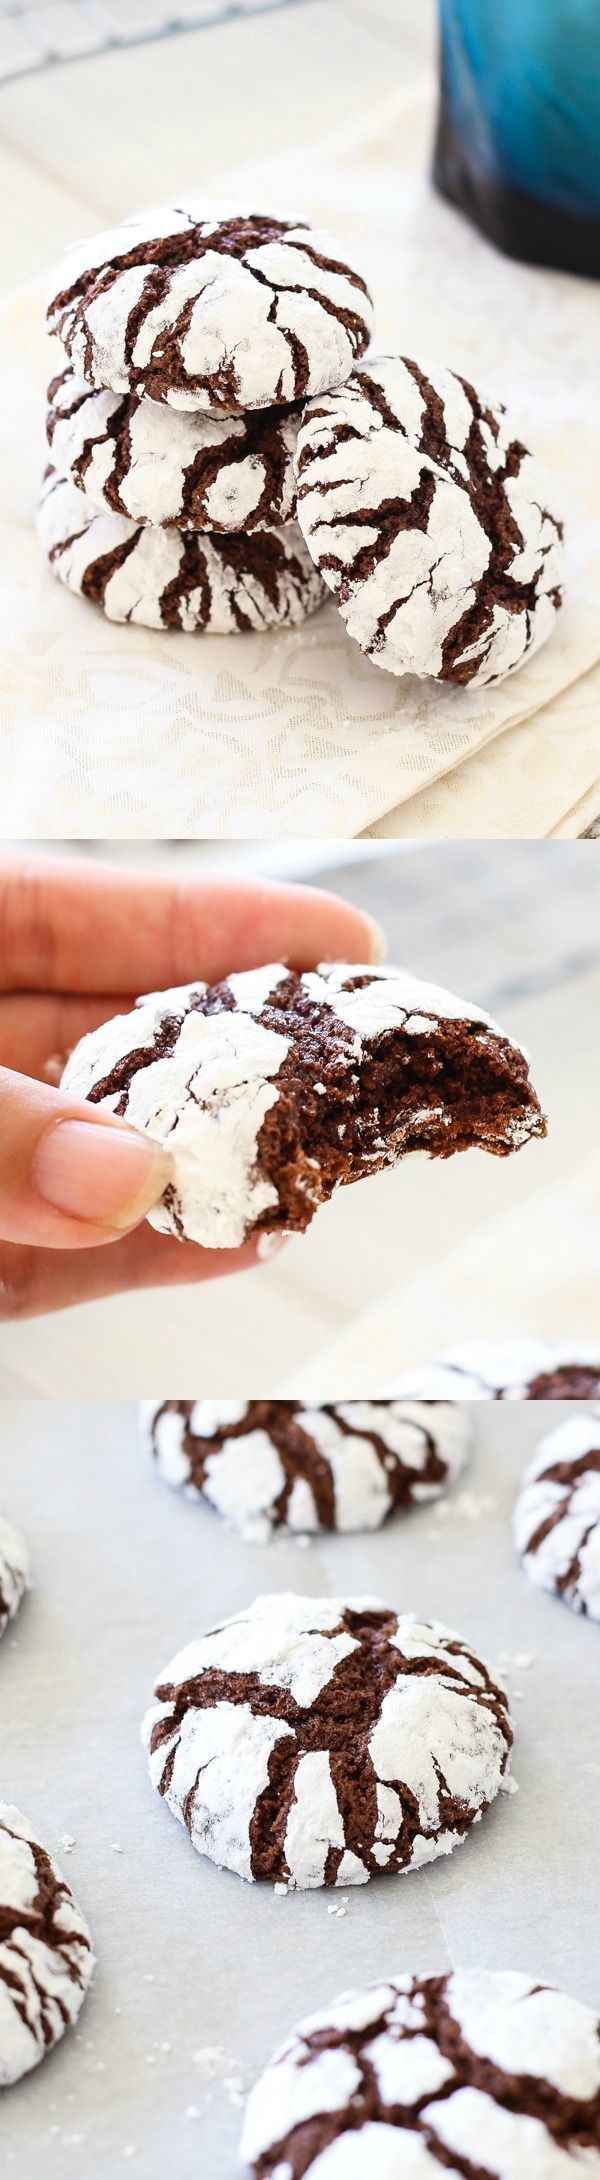 Chocolate Crinkle Cookies – the perfect holiday and Christmas cookies recipe. Home